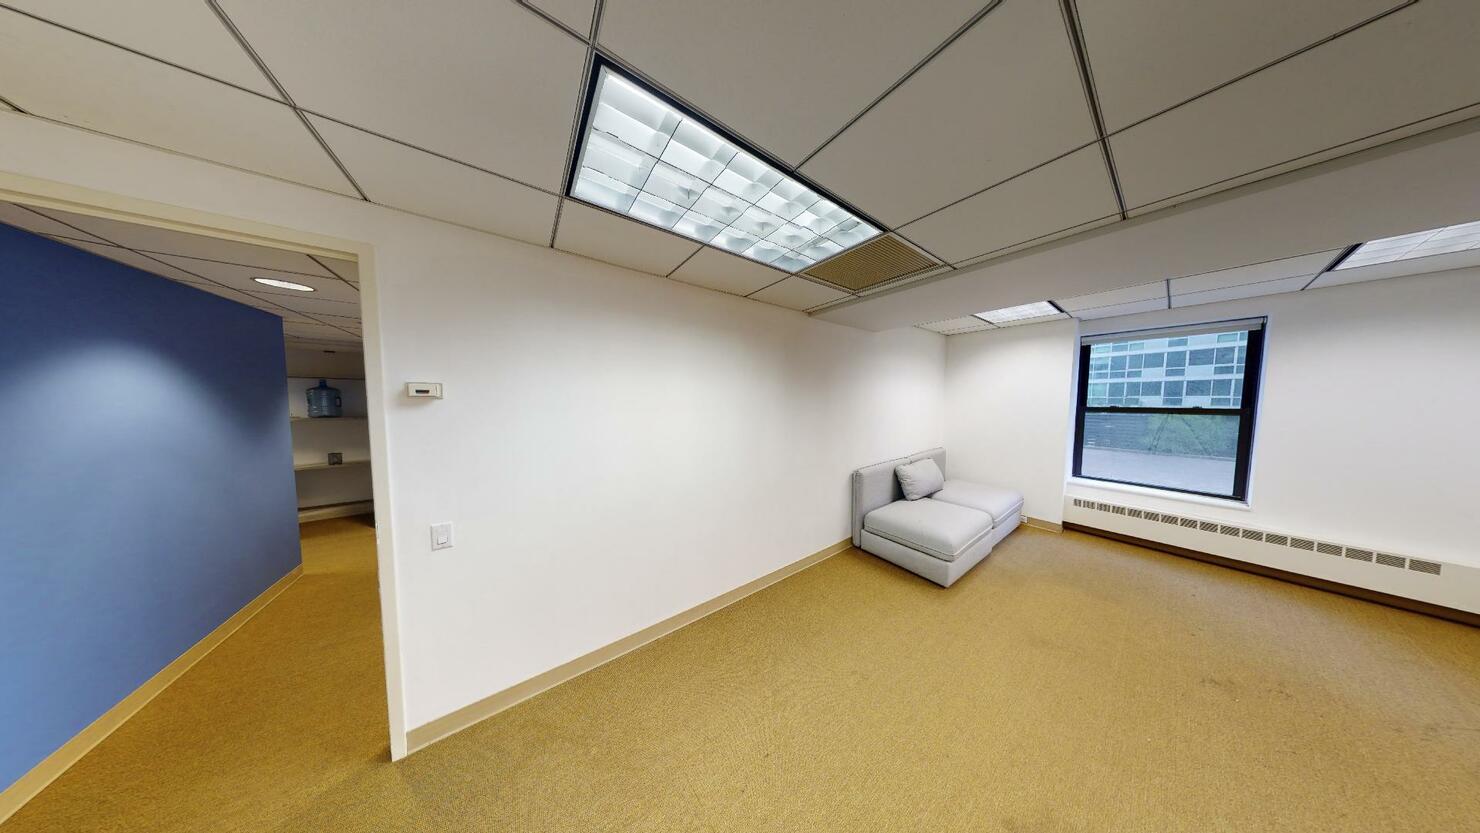 483 Tenth Avenue Office Space - Carpeted Office with a Sofa